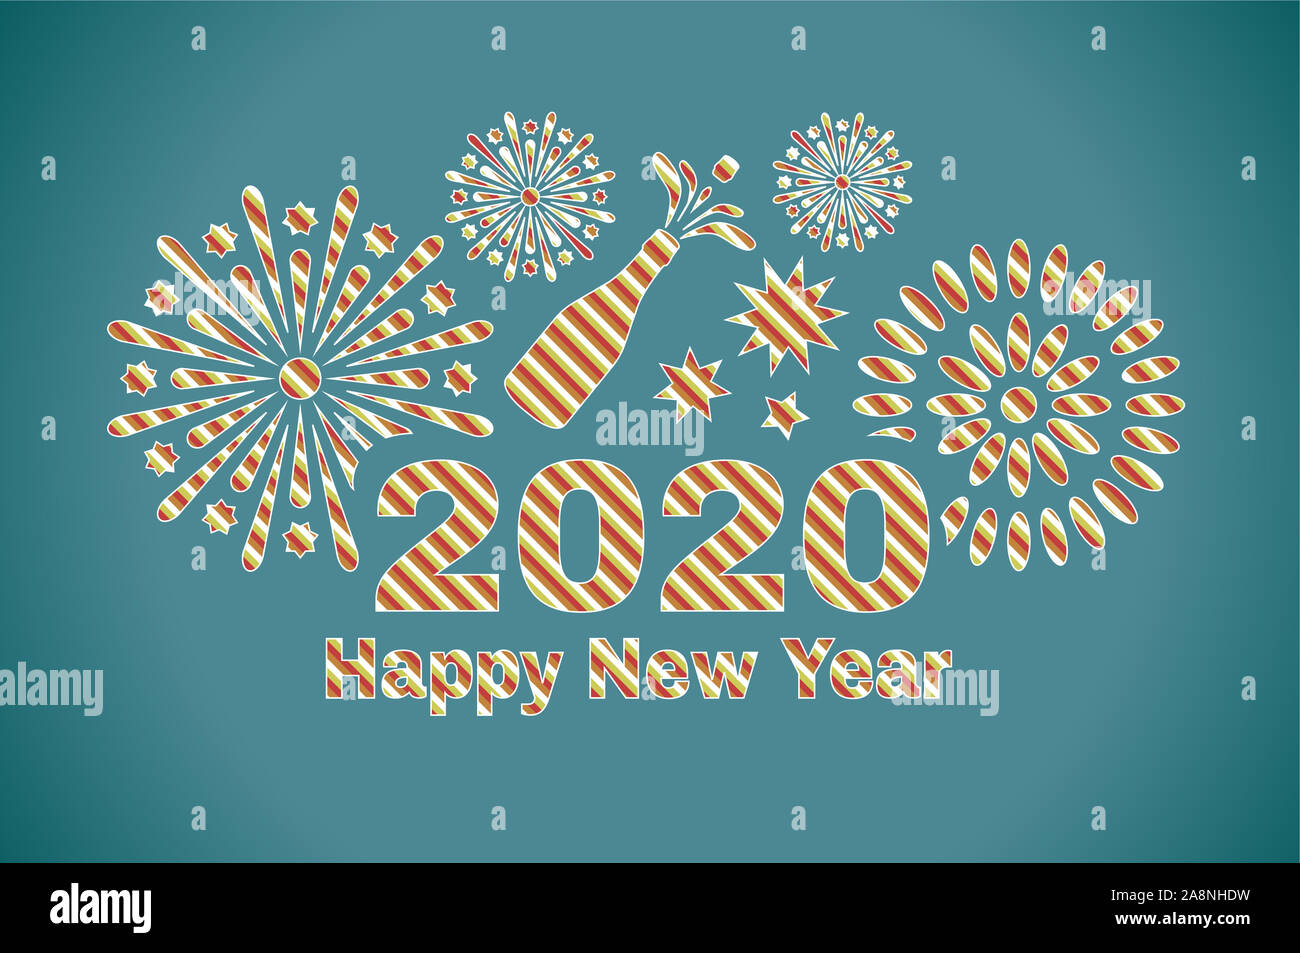 Picture for the New Year. Inscription Happy New Year 2020 and fireworks in illustration. Stock Photo